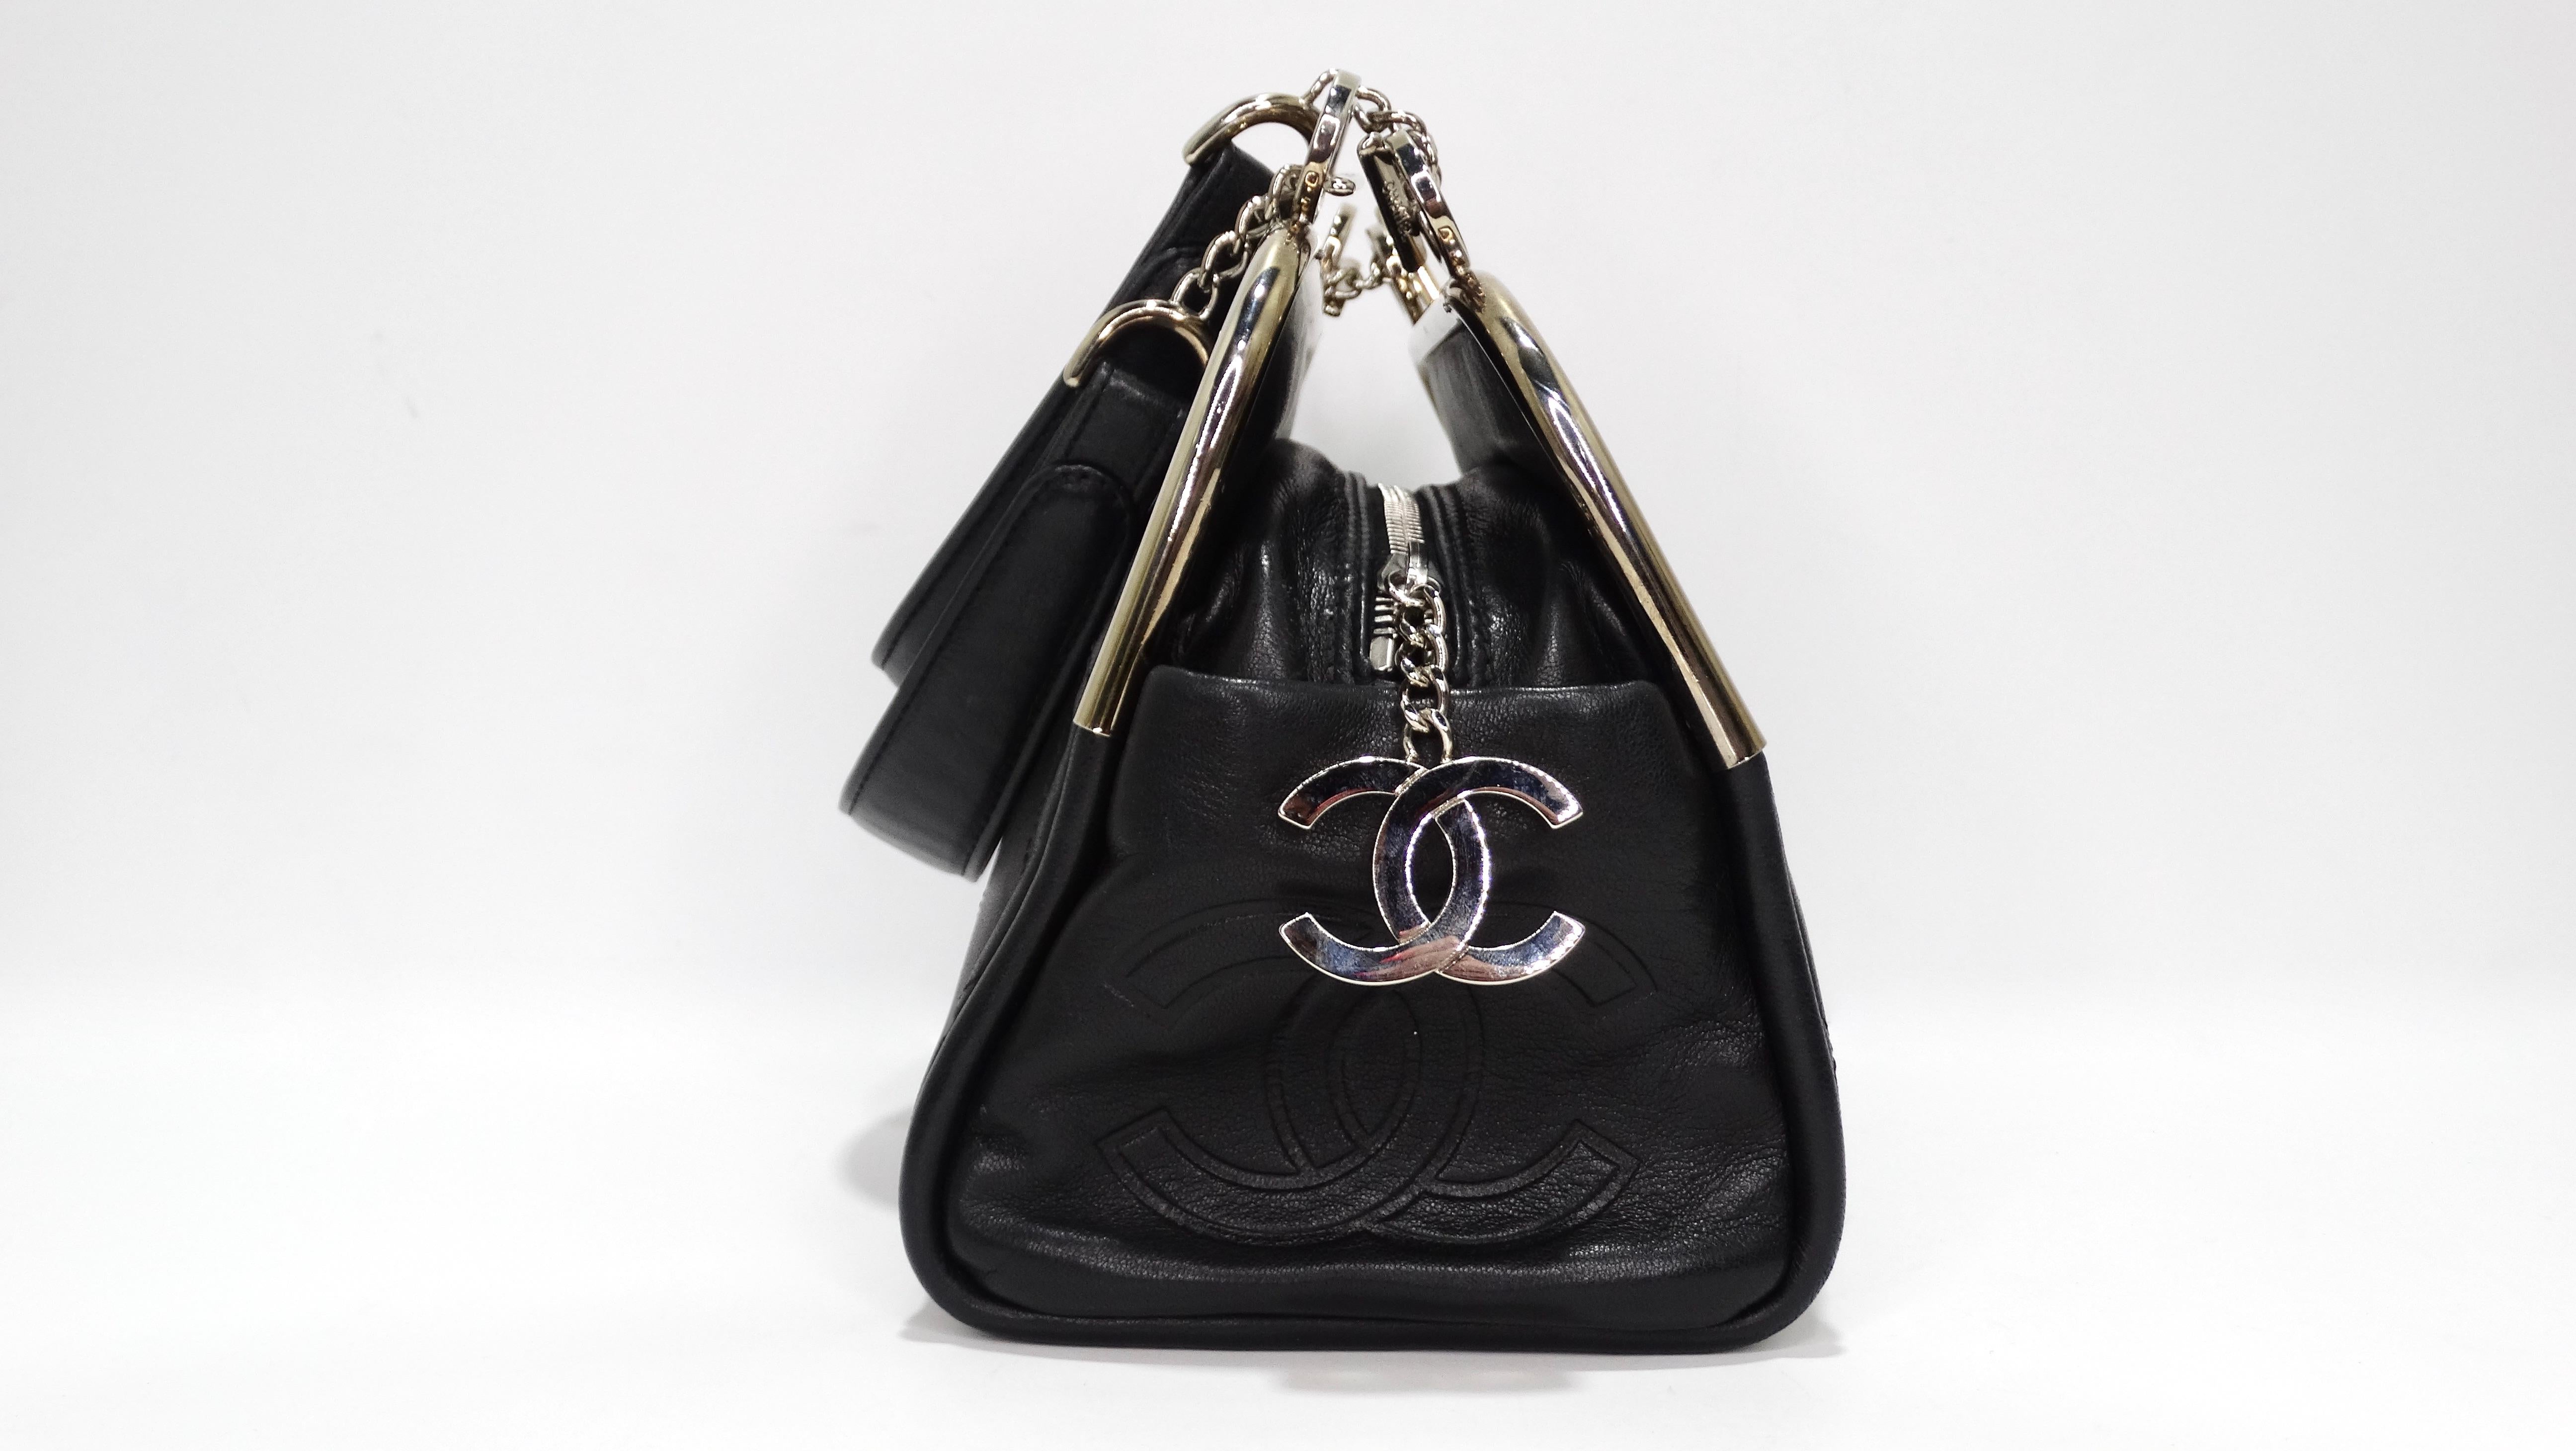 Women's or Men's Chanel Black Quilted Leather Top Handle Bag